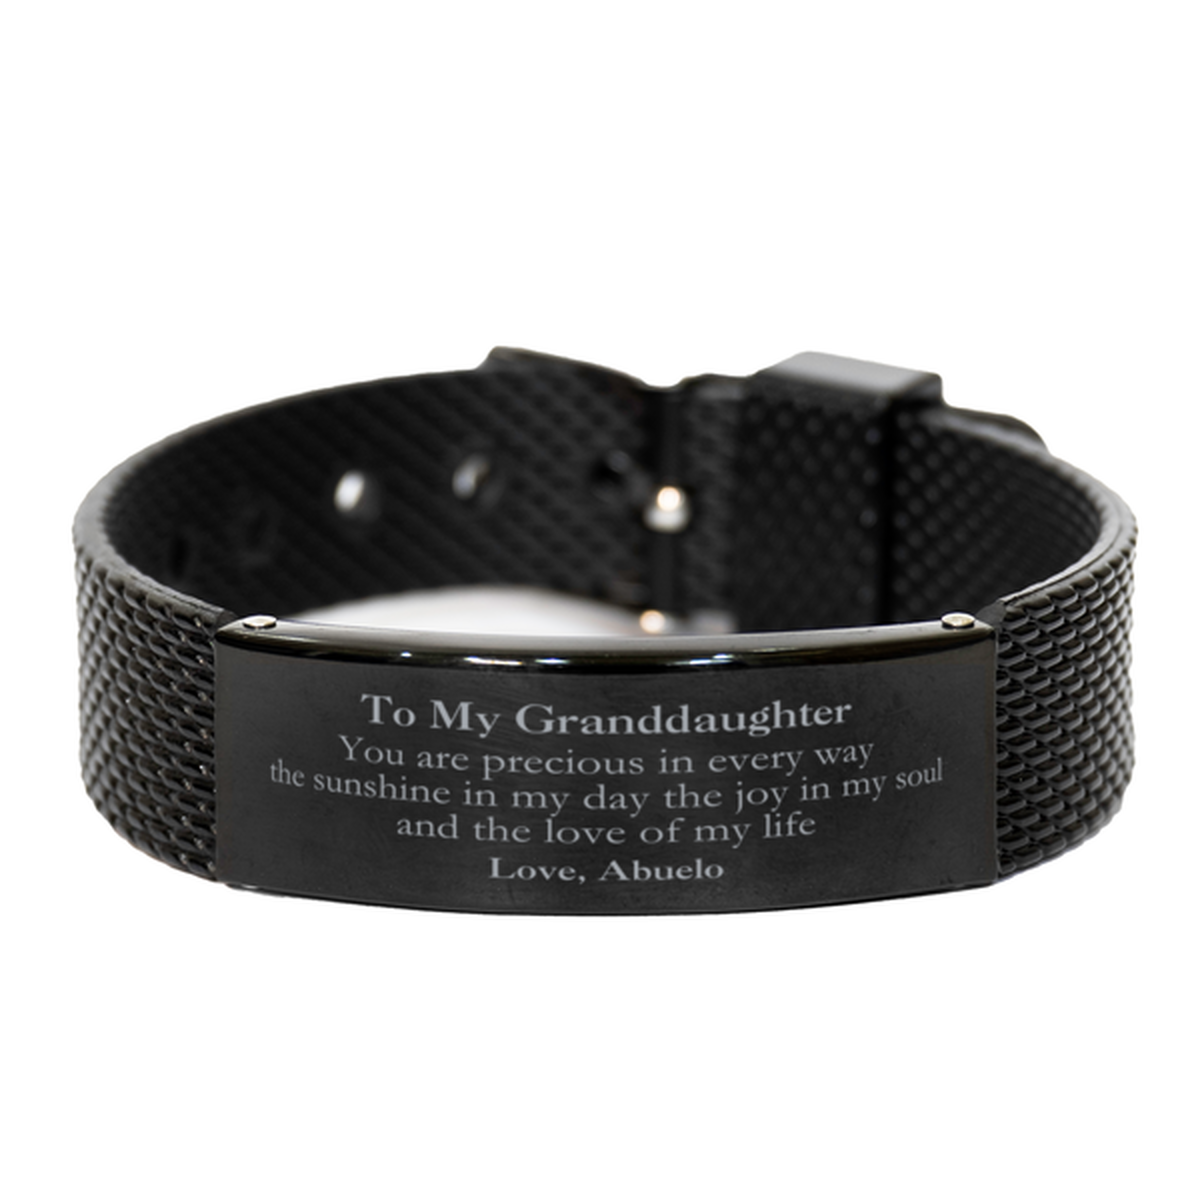 Graduation Gifts for Granddaughter Black Shark Mesh Bracelet Present from Abuelo, Christmas Granddaughter Birthday Gifts Granddaughter You are precious in every way the sunshine in my day. Love, Abuelo